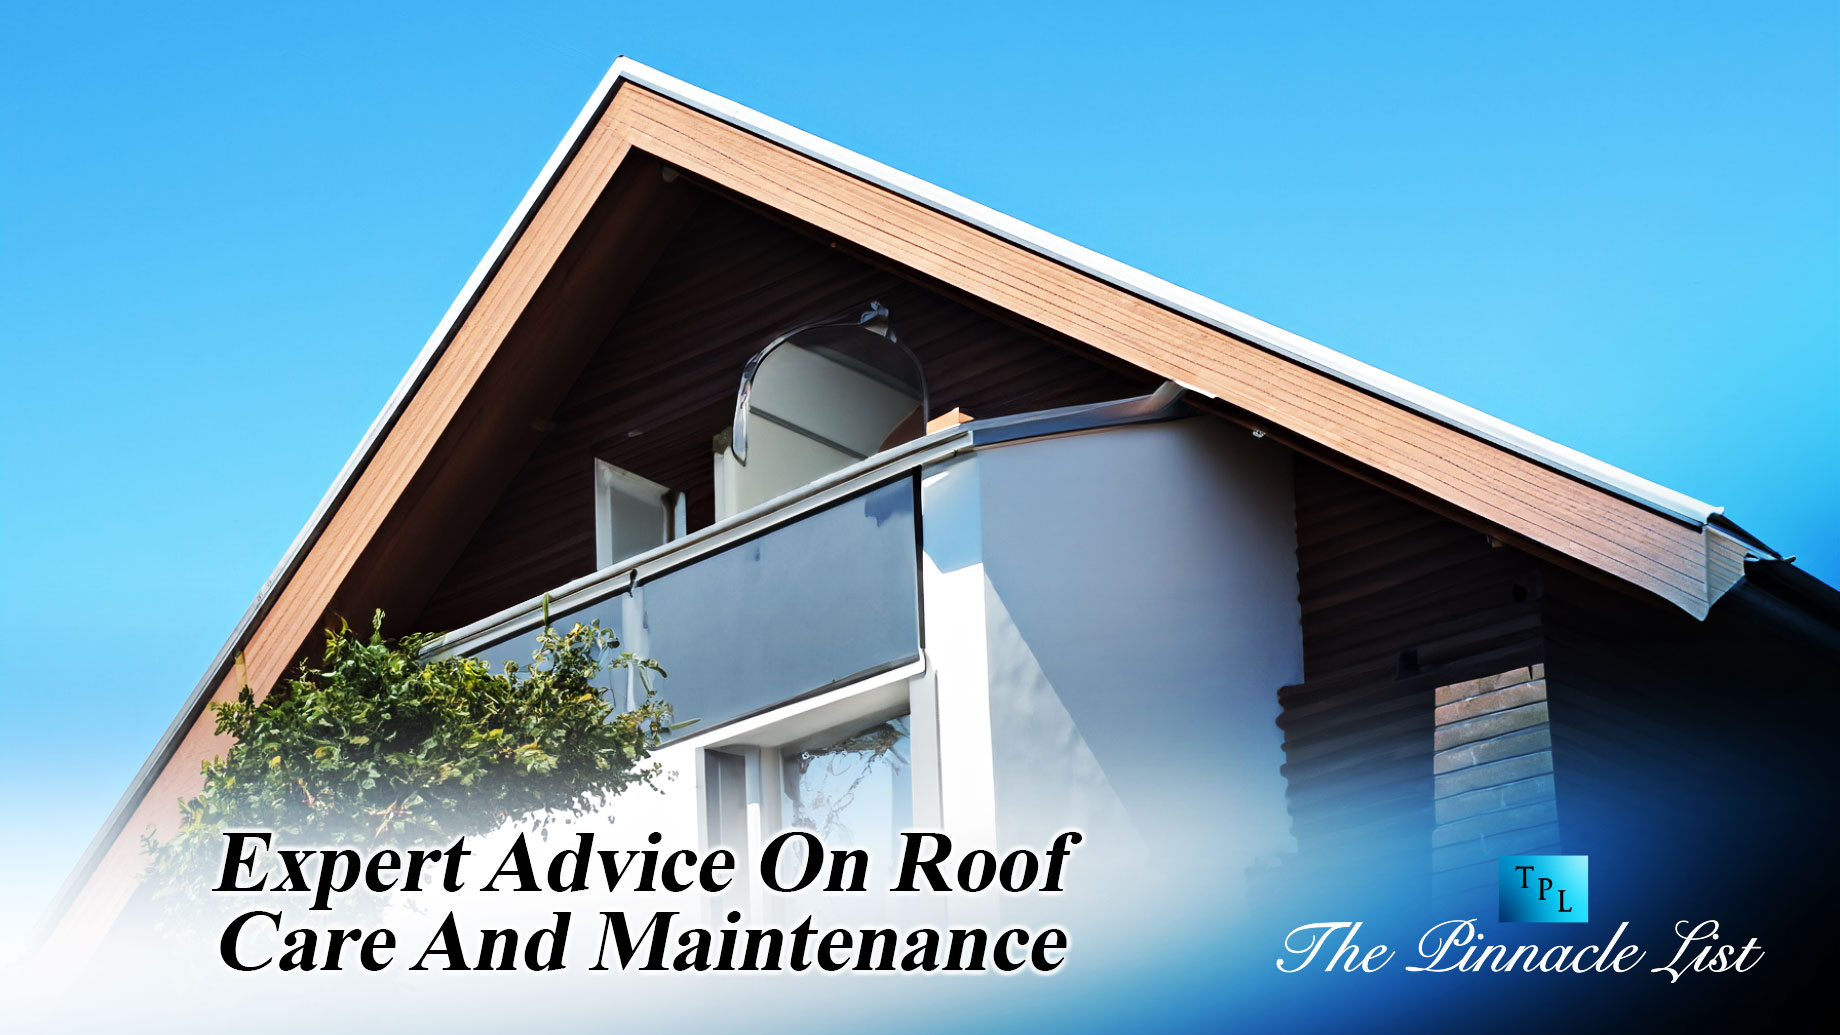 Expert Advice On Roof Care And Maintenance